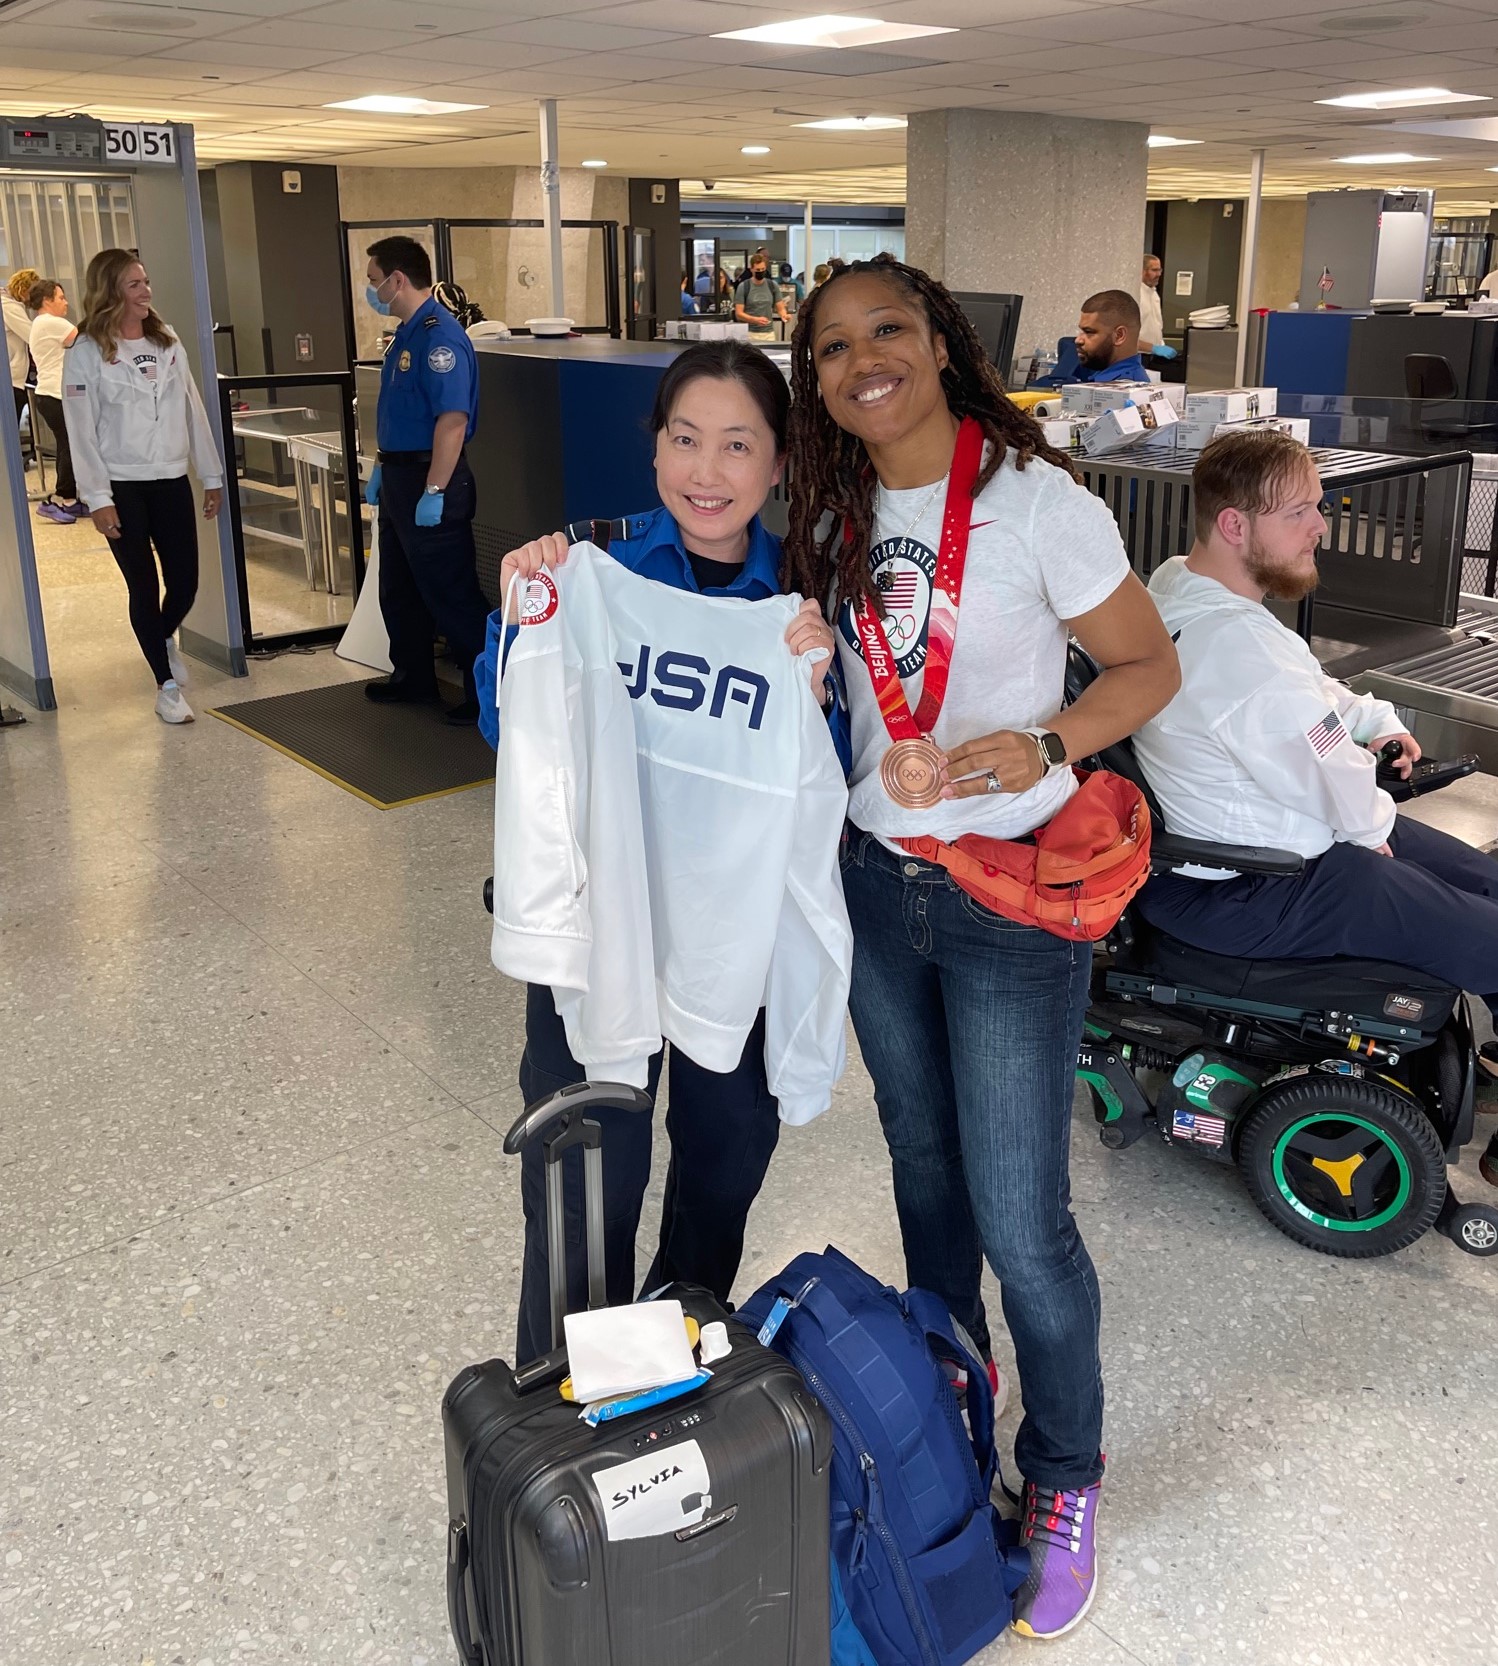 IAD TSA Officer Sena Park poses with 2022 Winter Olympian Sylvia Hoffman who won a bronze medal in bobsled. Hoffman gave Park her USA team jacket during the brief visit. (Photo by Eric Beane)